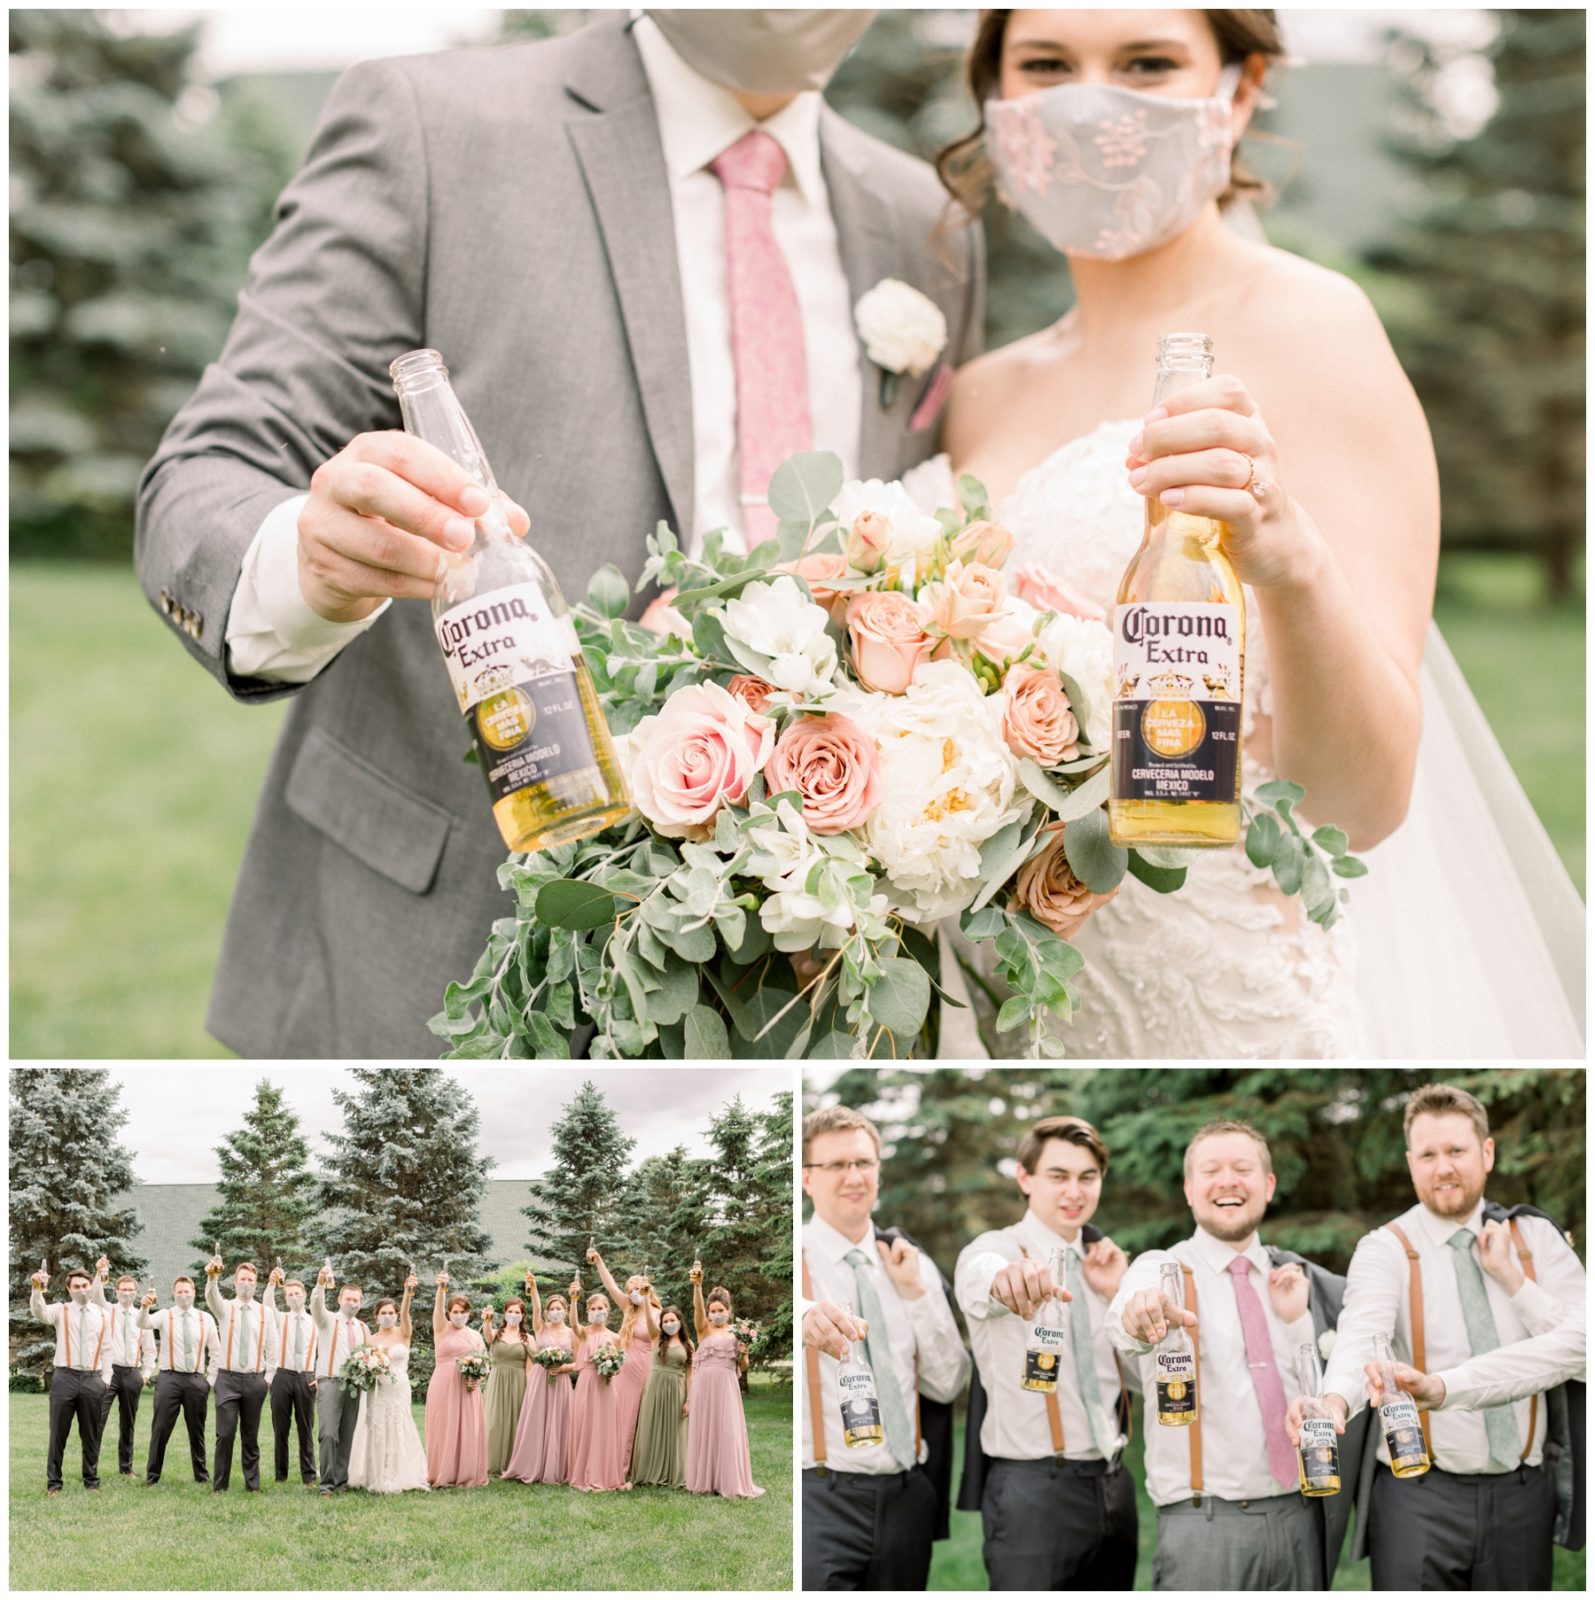 Compilation of photos. One photo of the bride and groom wearing masks and holding two Corona beers. The other one shows the bride, the groom, the bridesmaids and the groomsmen holding up a Corona beer. The last one shows the groom and three groomsmen smiling and holding a Corona beer.